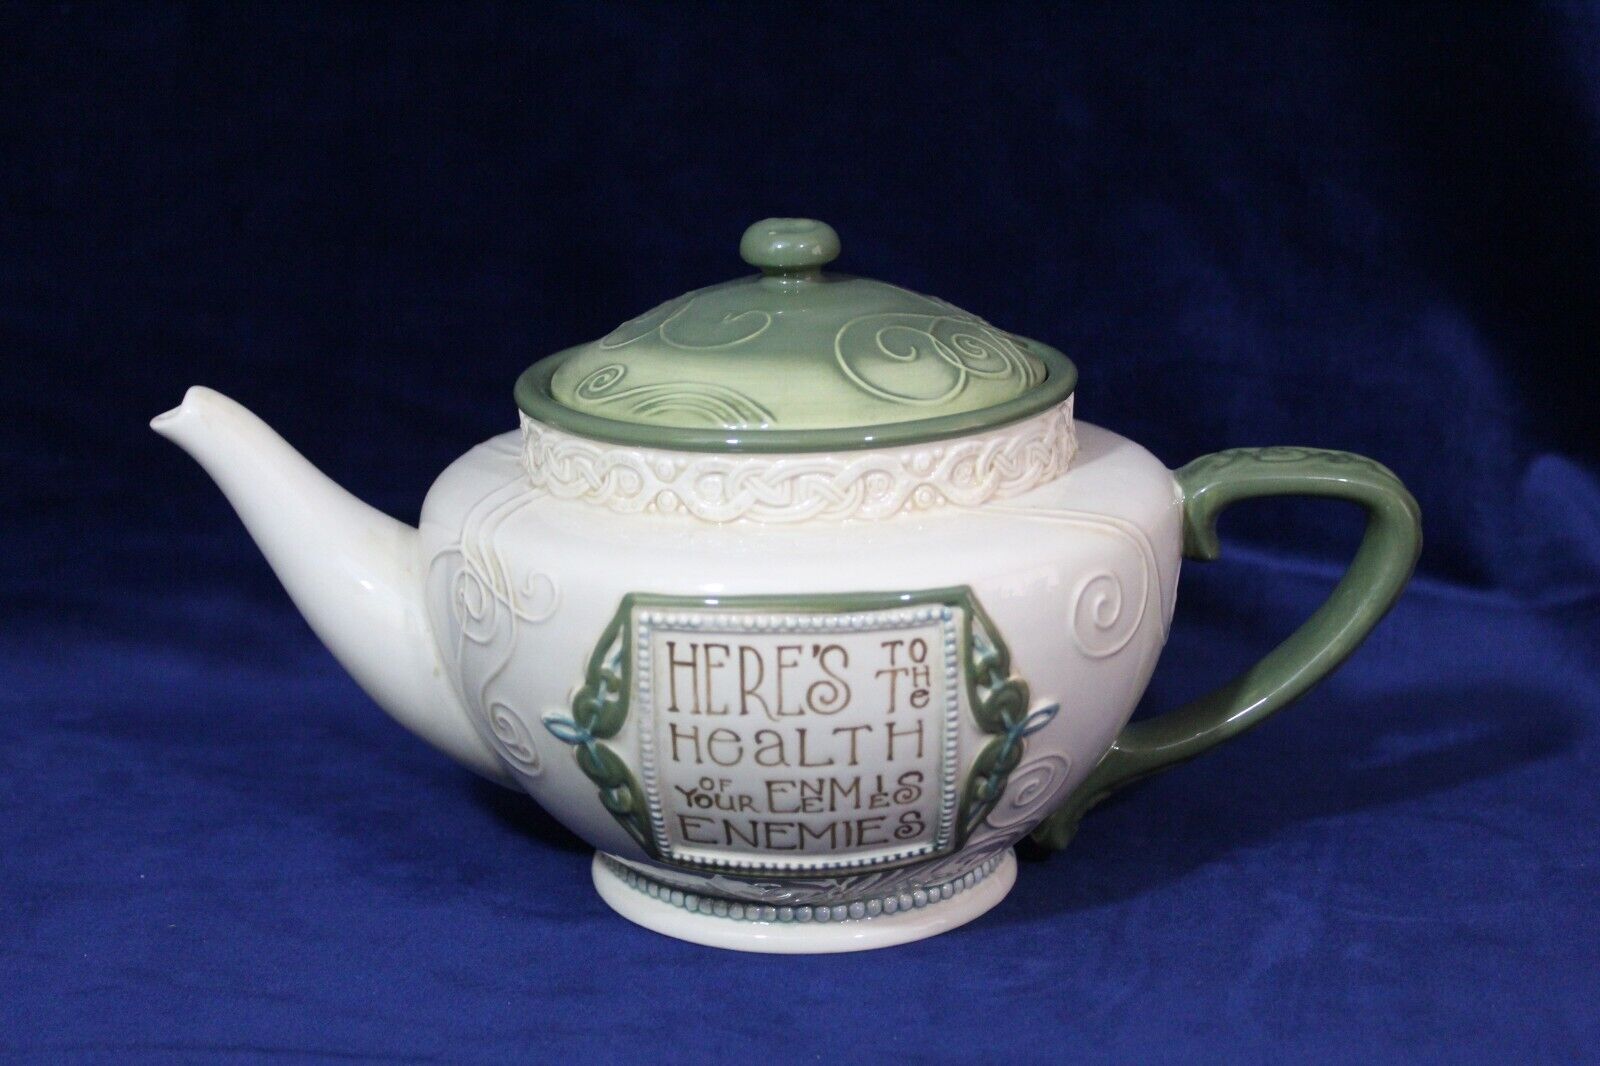 Grasslands Road Celtic Heritage Green and Cream colored Stoneware Teapot